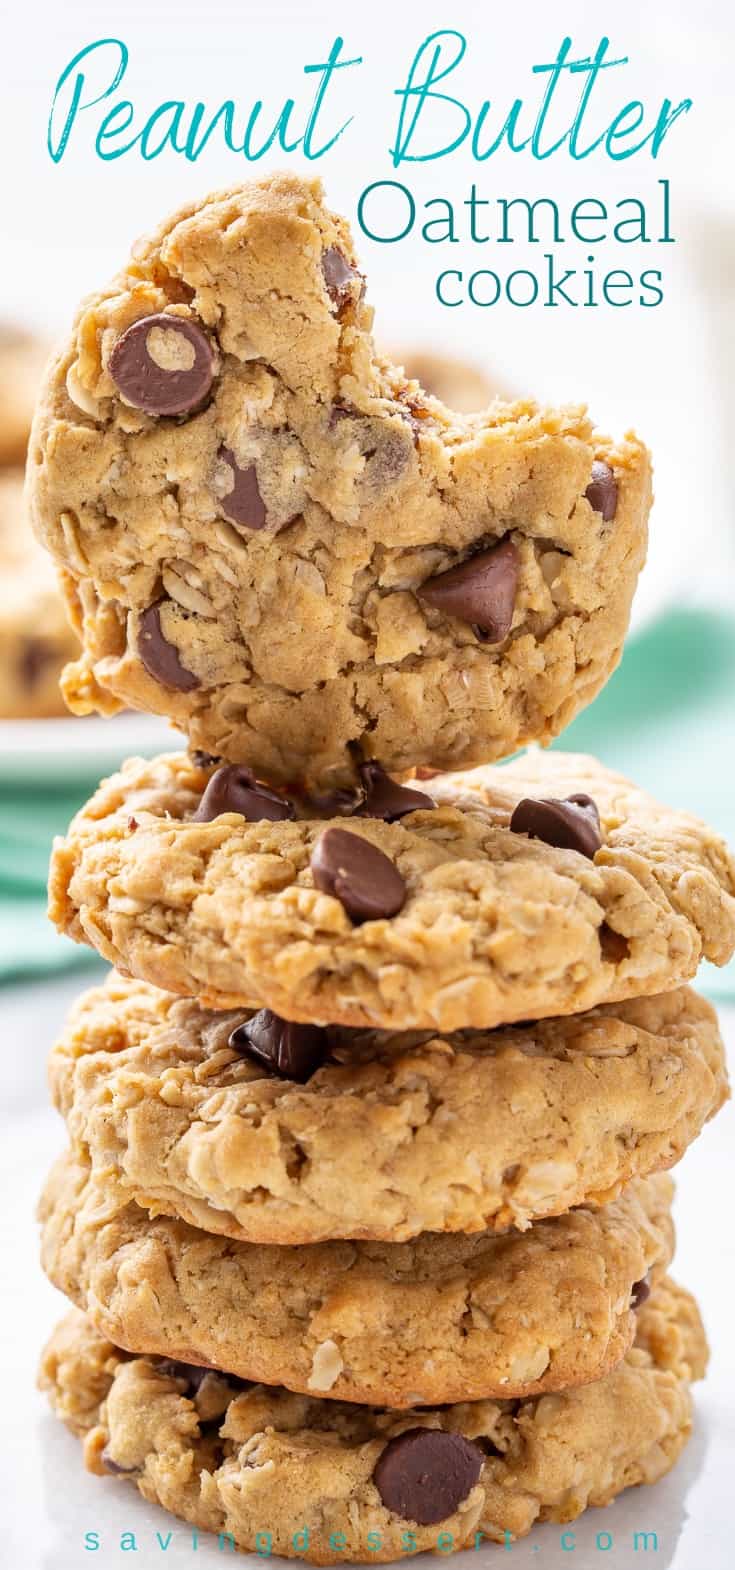 A stack of peanut butter oatmeal cookies with chocolate chips